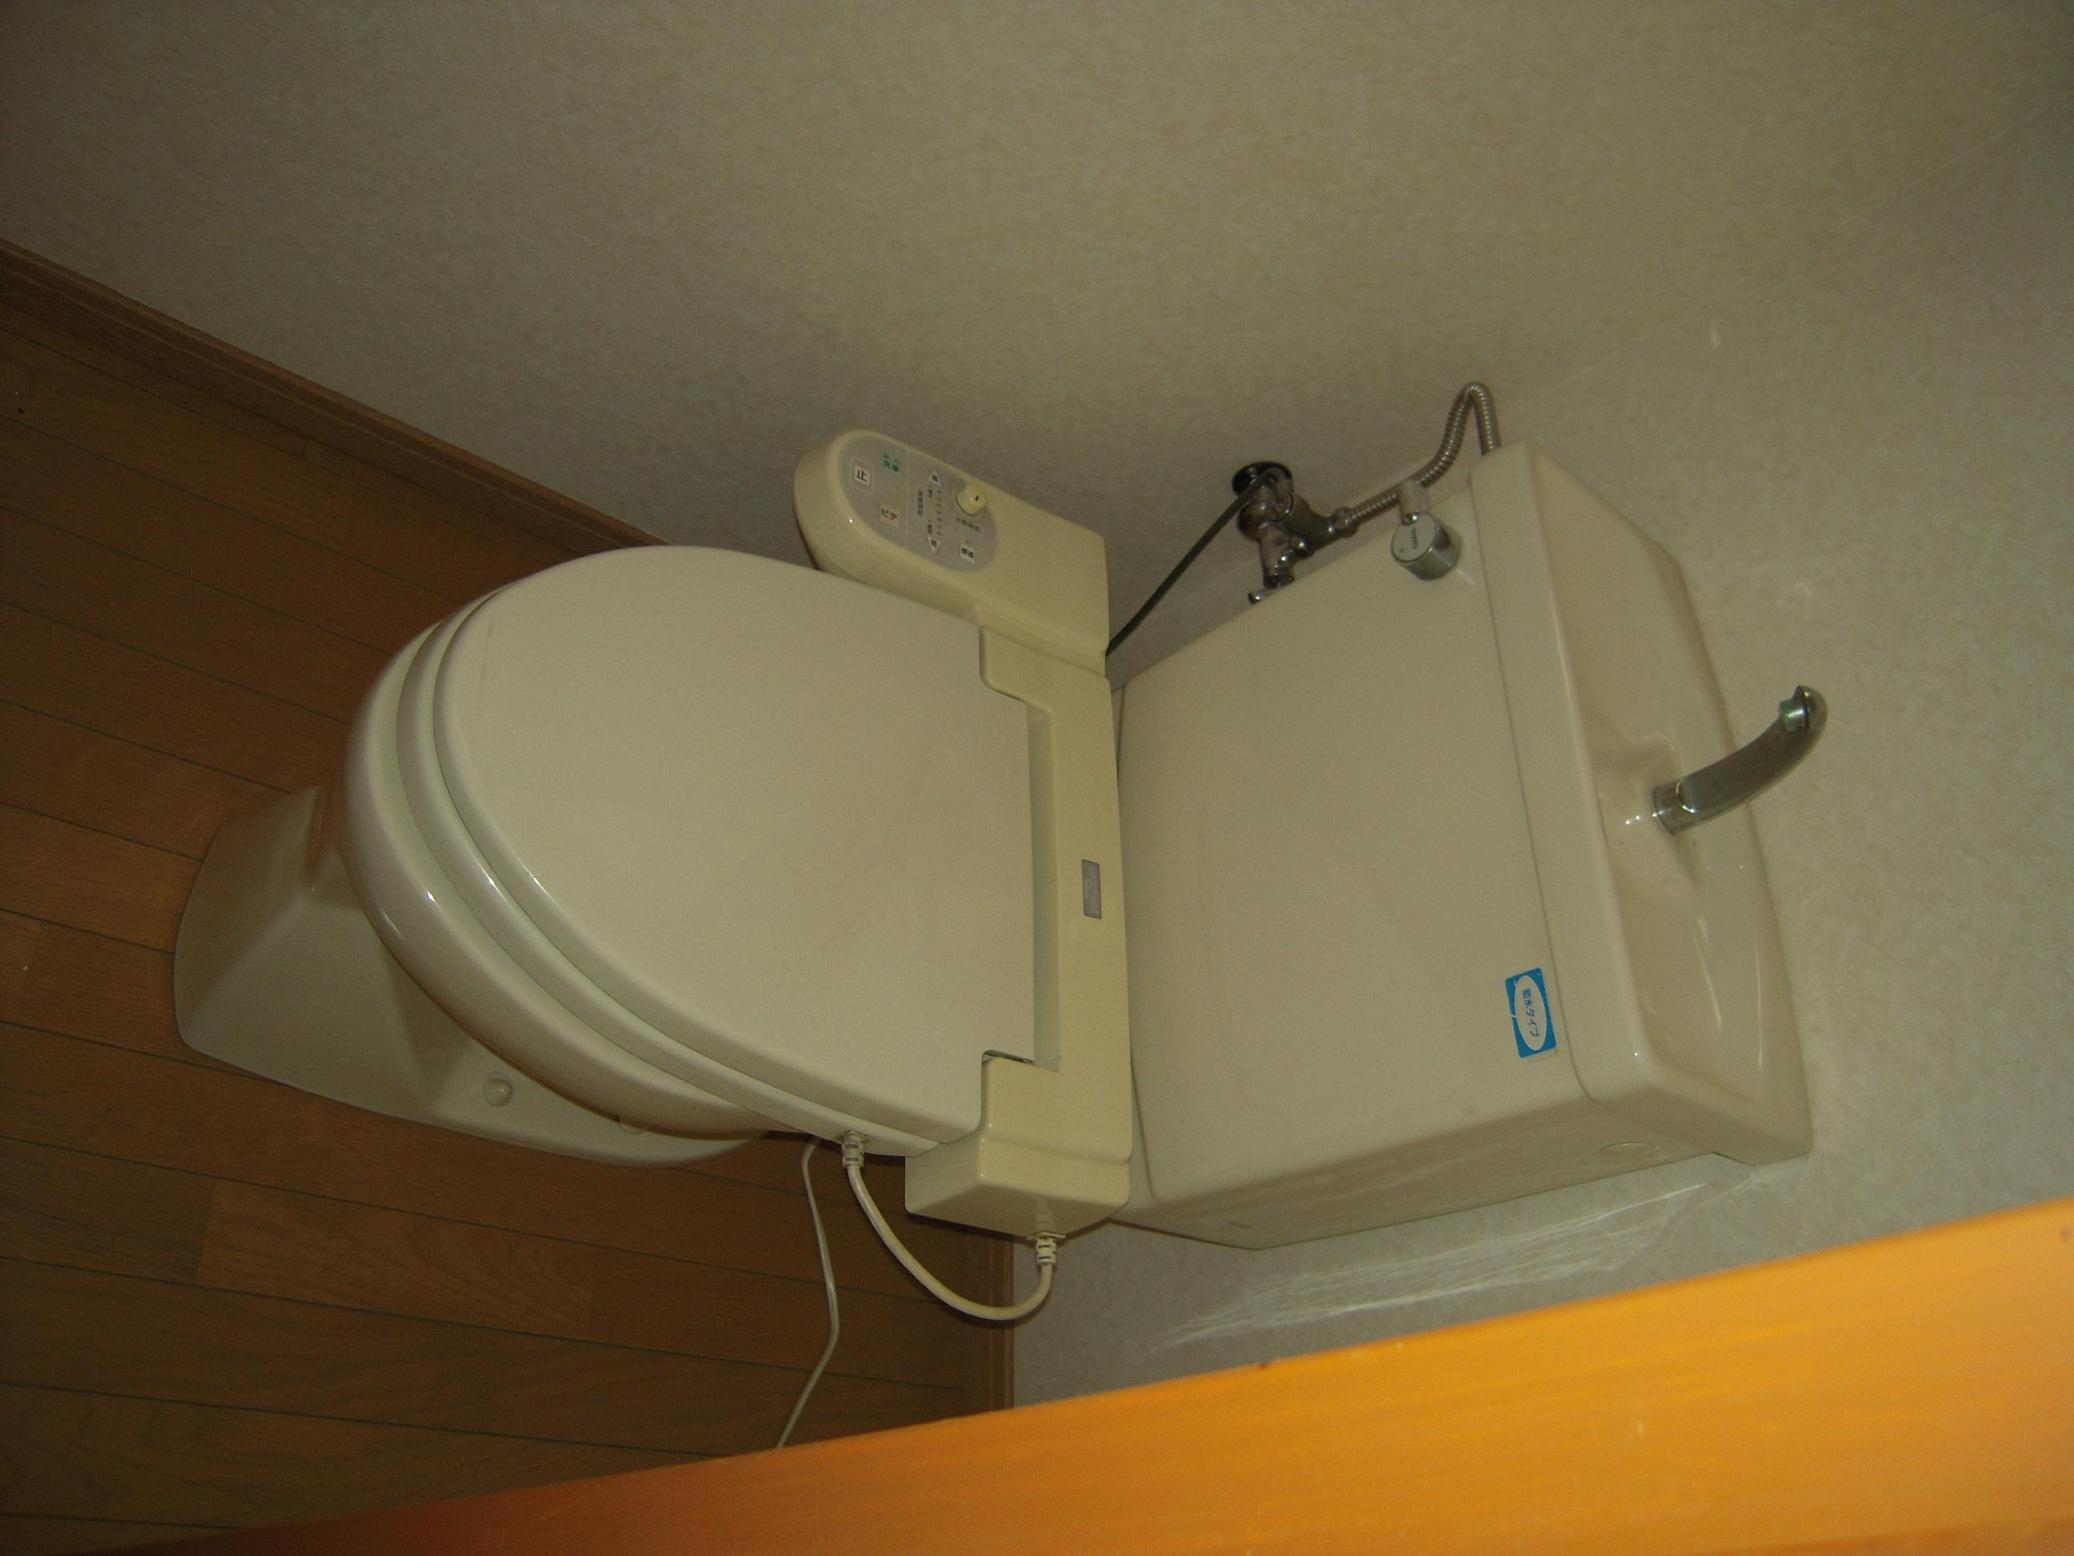 Toilet. It is broad in with window